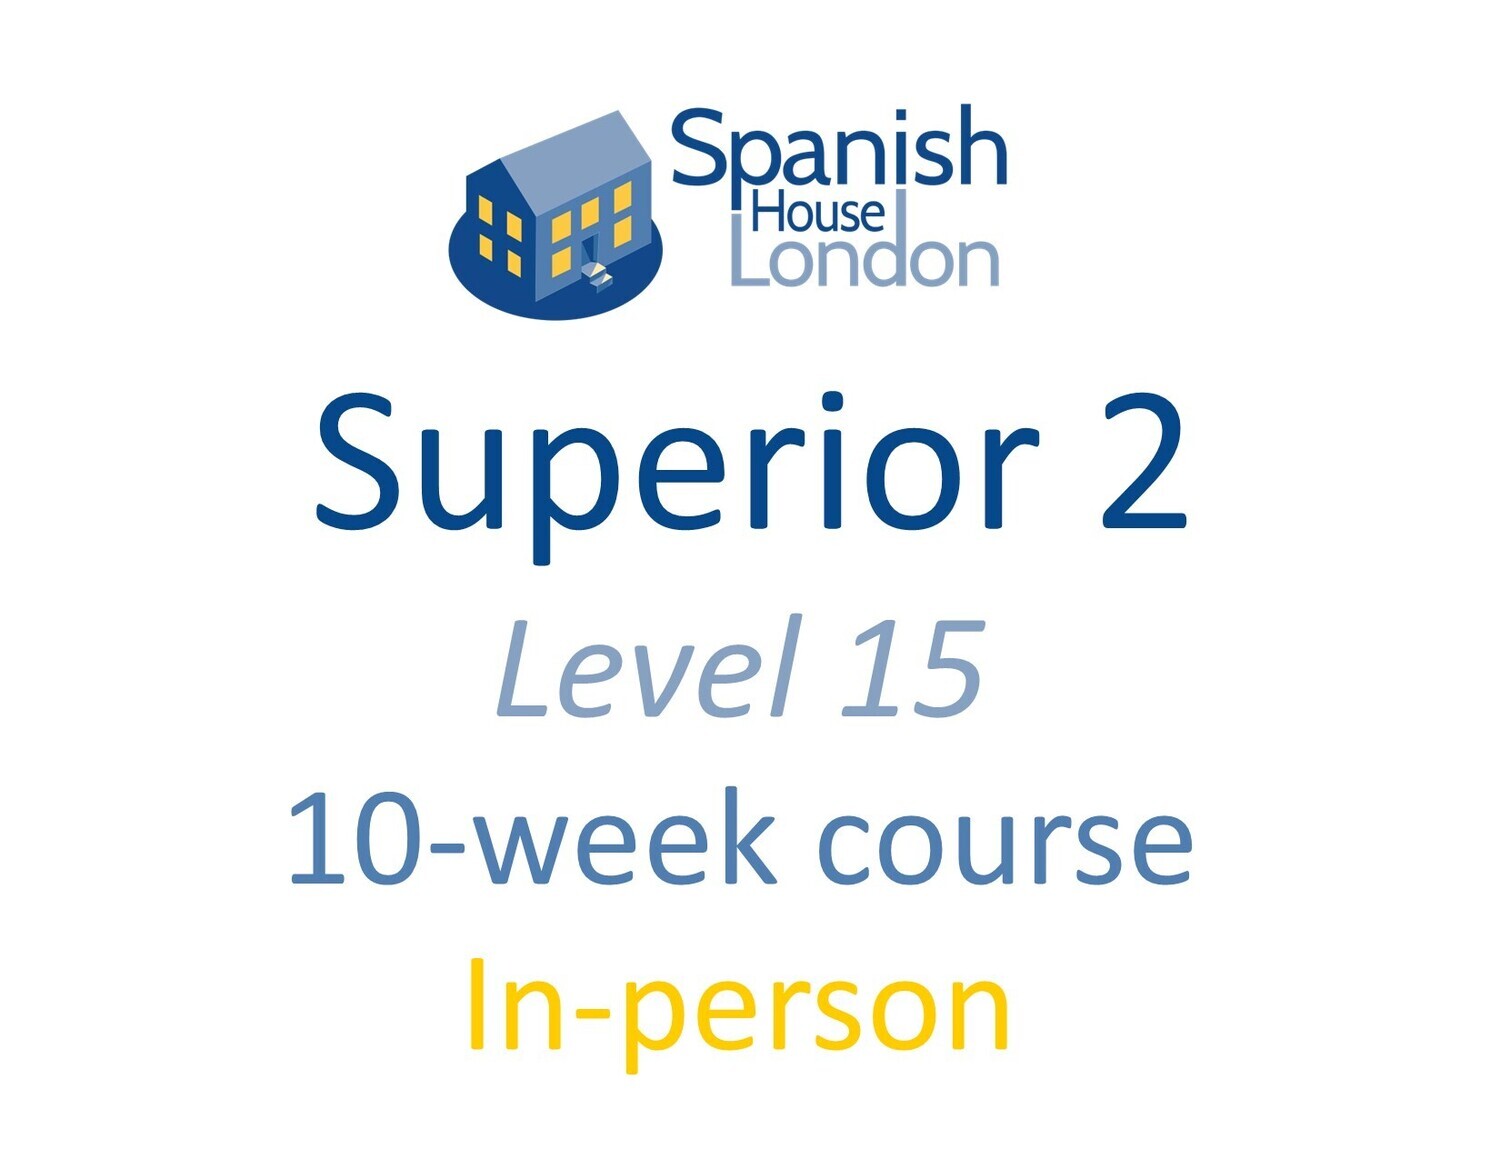 Superior 2 Course starting on 8th June at 7.30pm in Clapham North